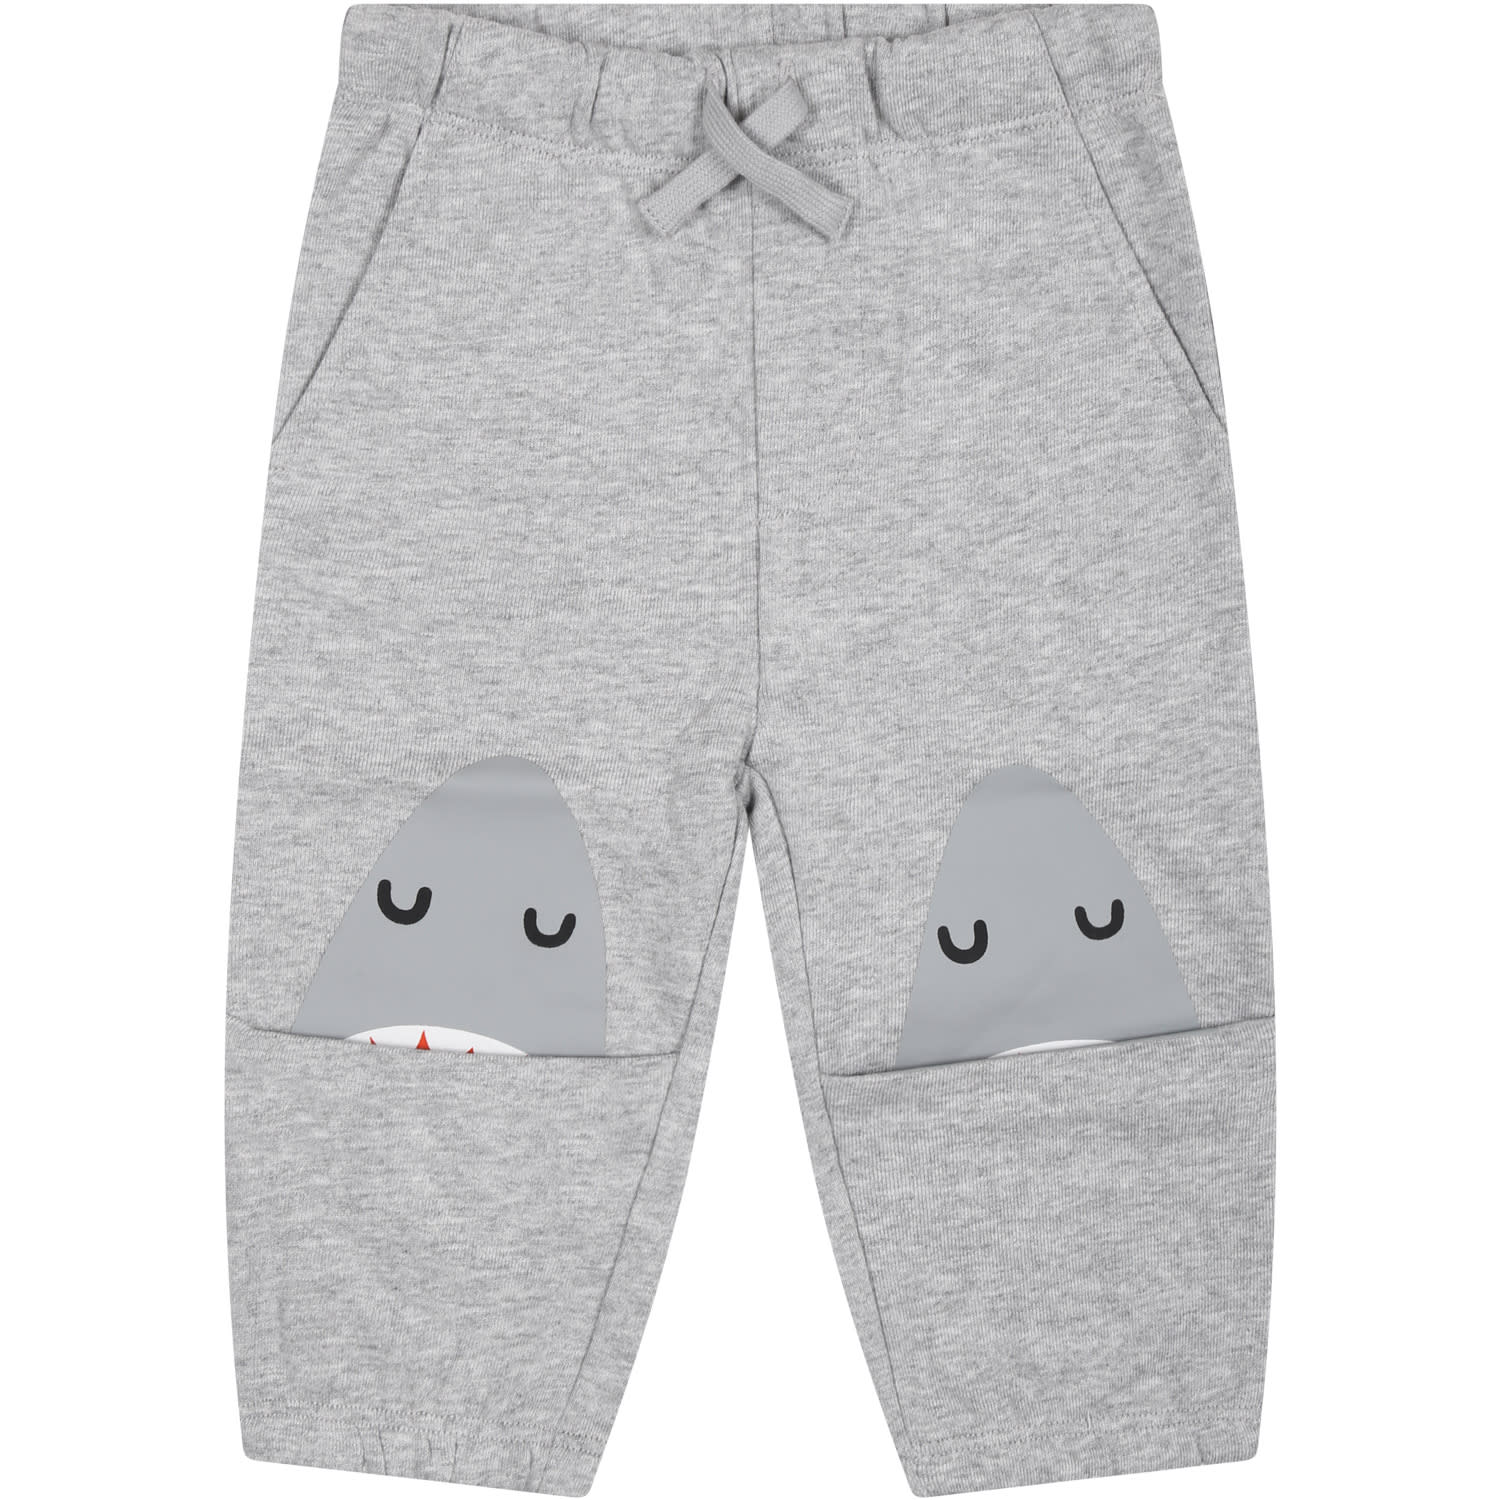 Stella McCartney Gray Trousers For Baby Boy With Shark Fin Print